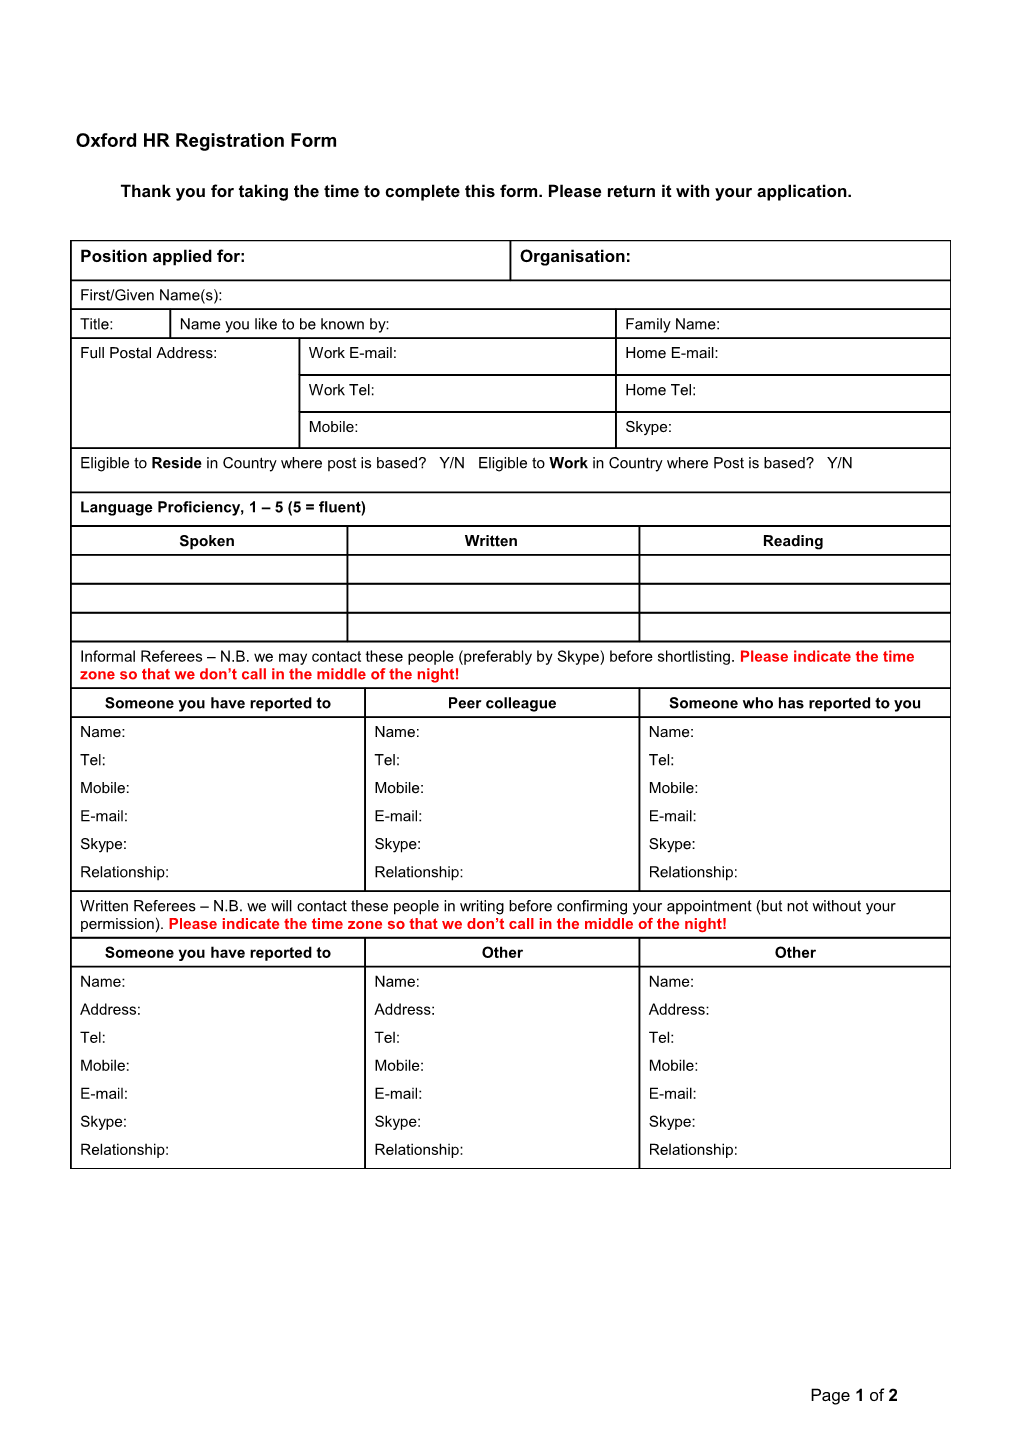 Oxford HR Application Cover Sheet